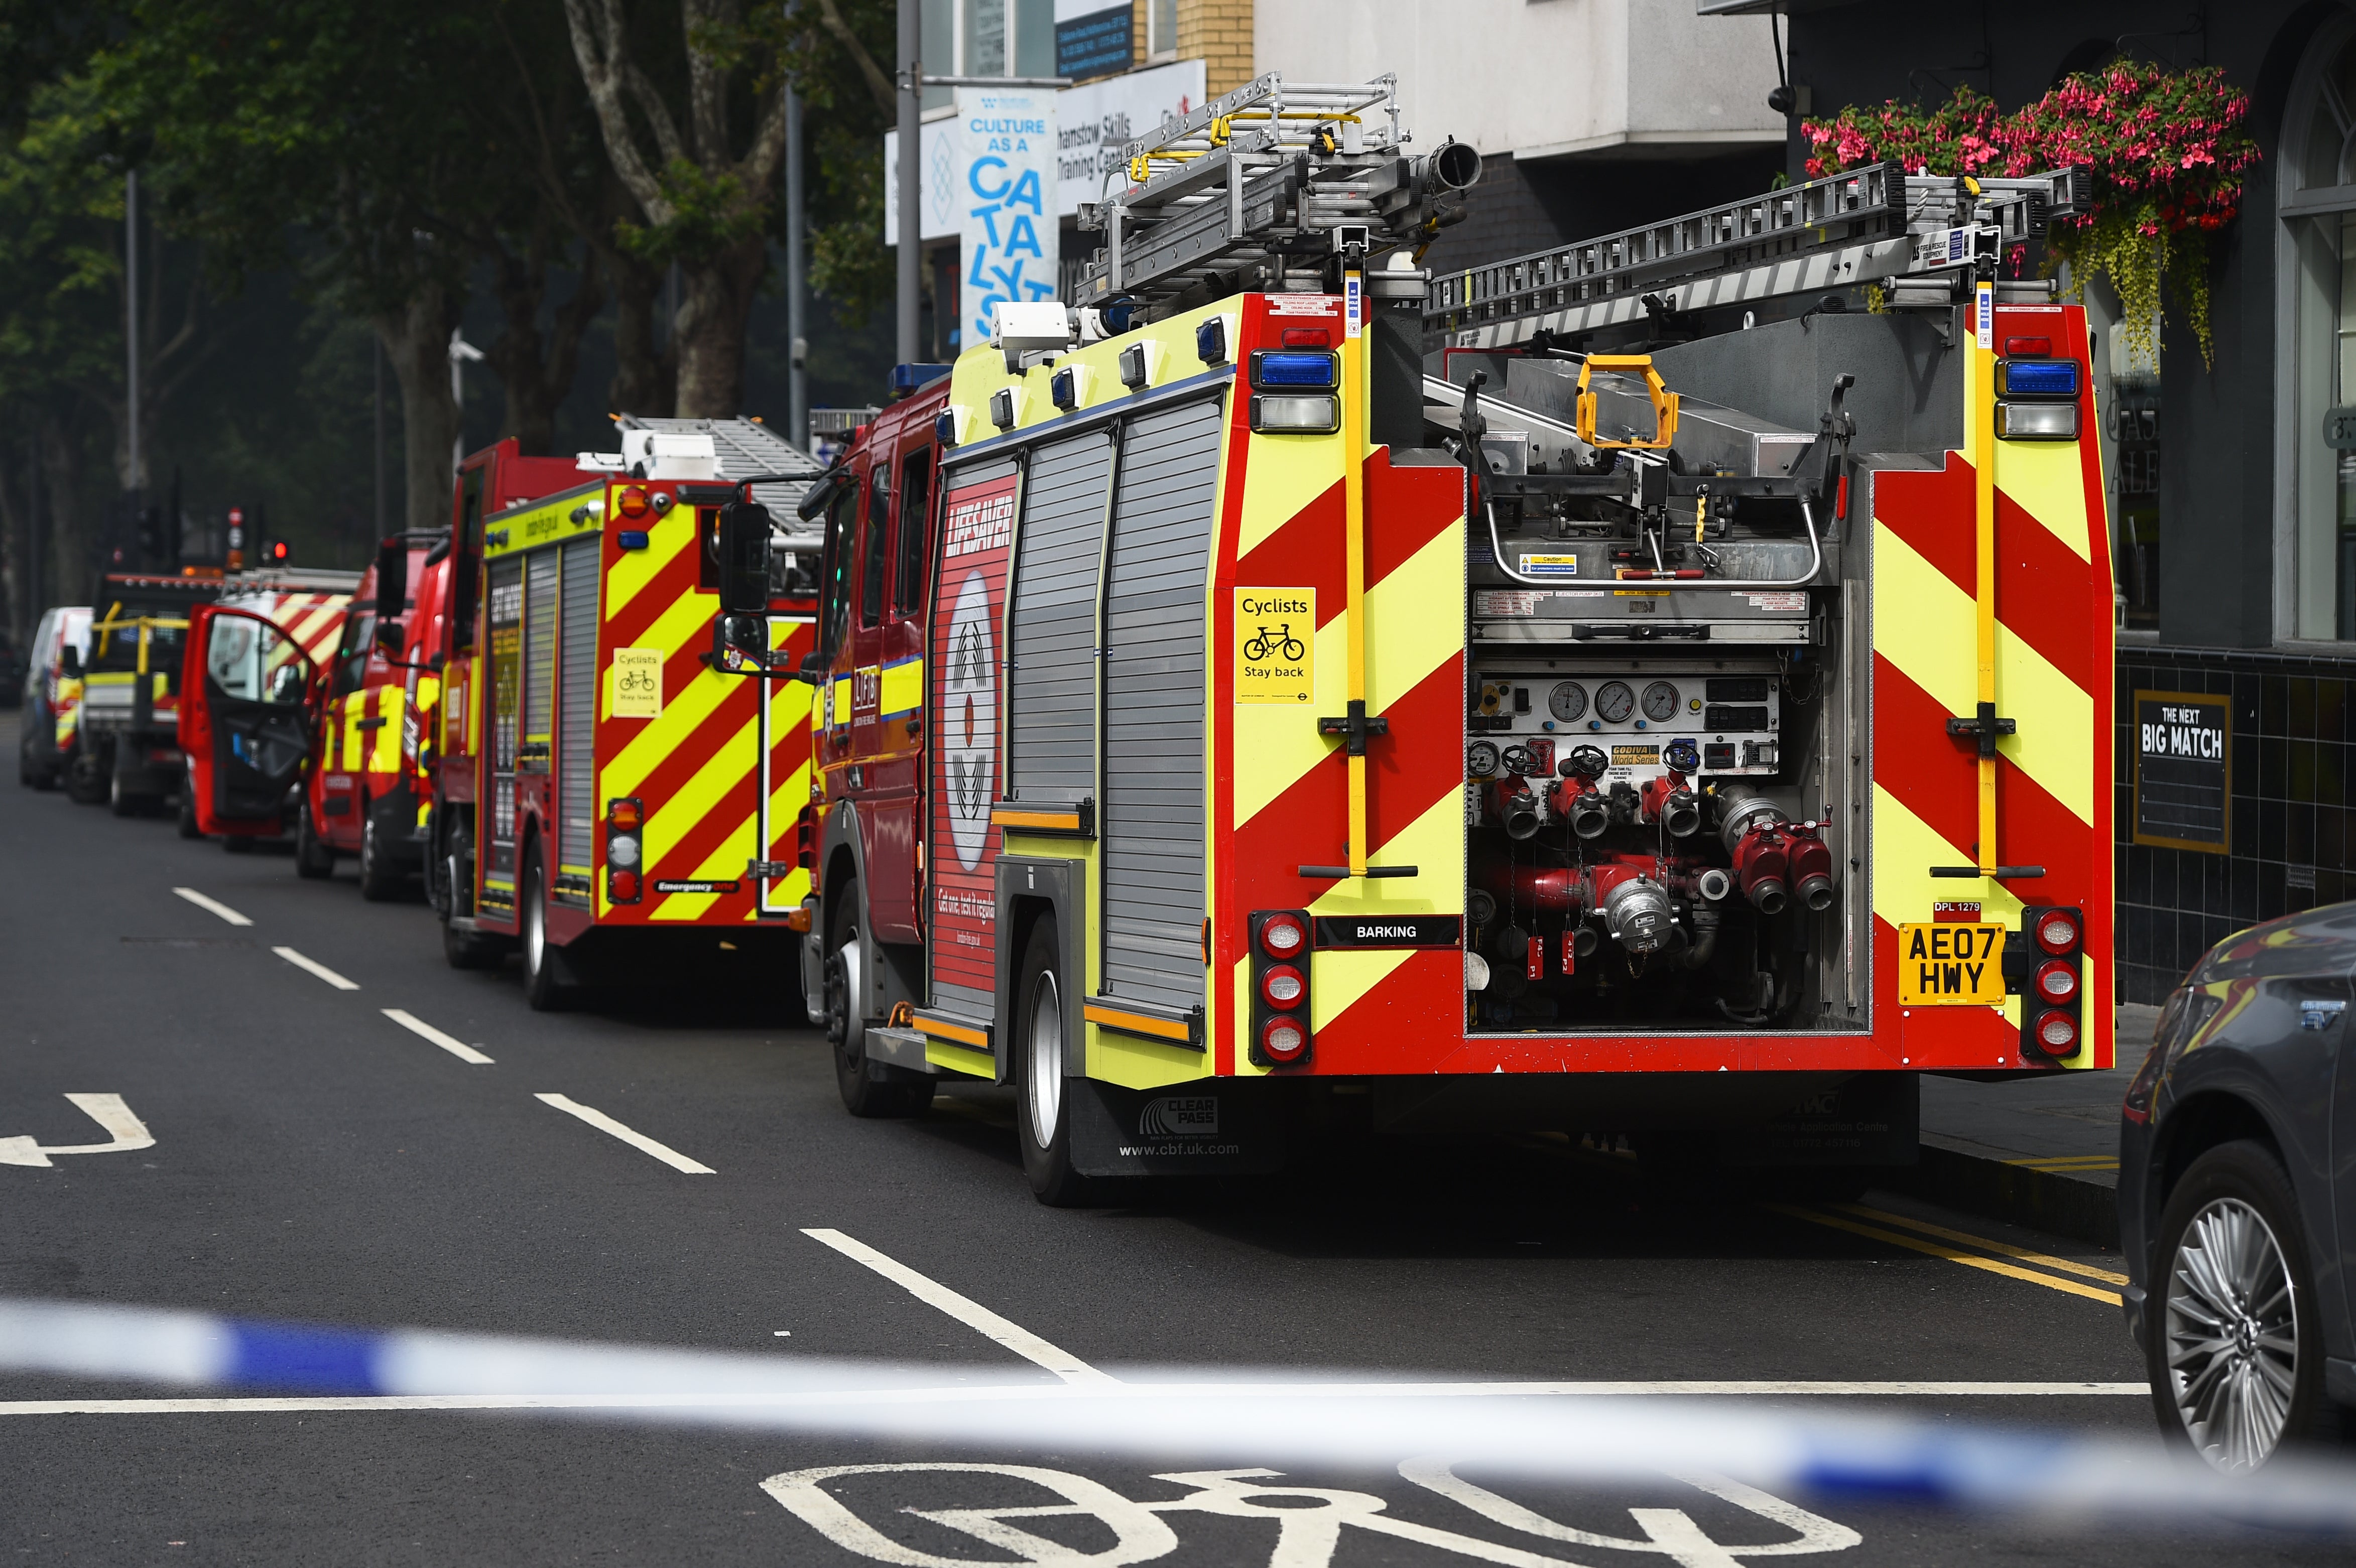 Fire services now respond to more ‘non-fire incidents’ than fires in England